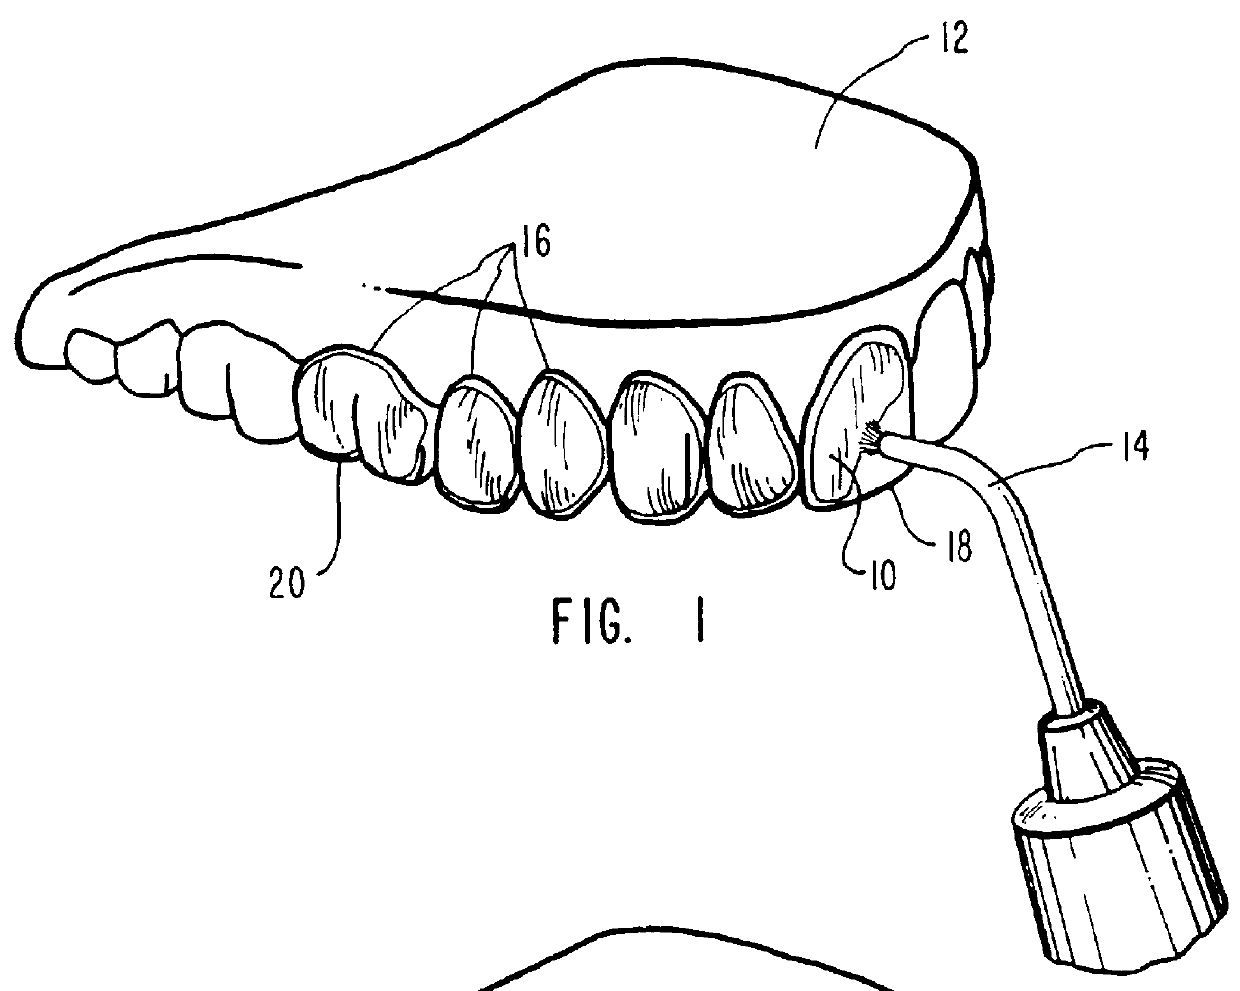 Methods for treating a person's teeth using sticky dental compositions in combination with passive-type dental trays